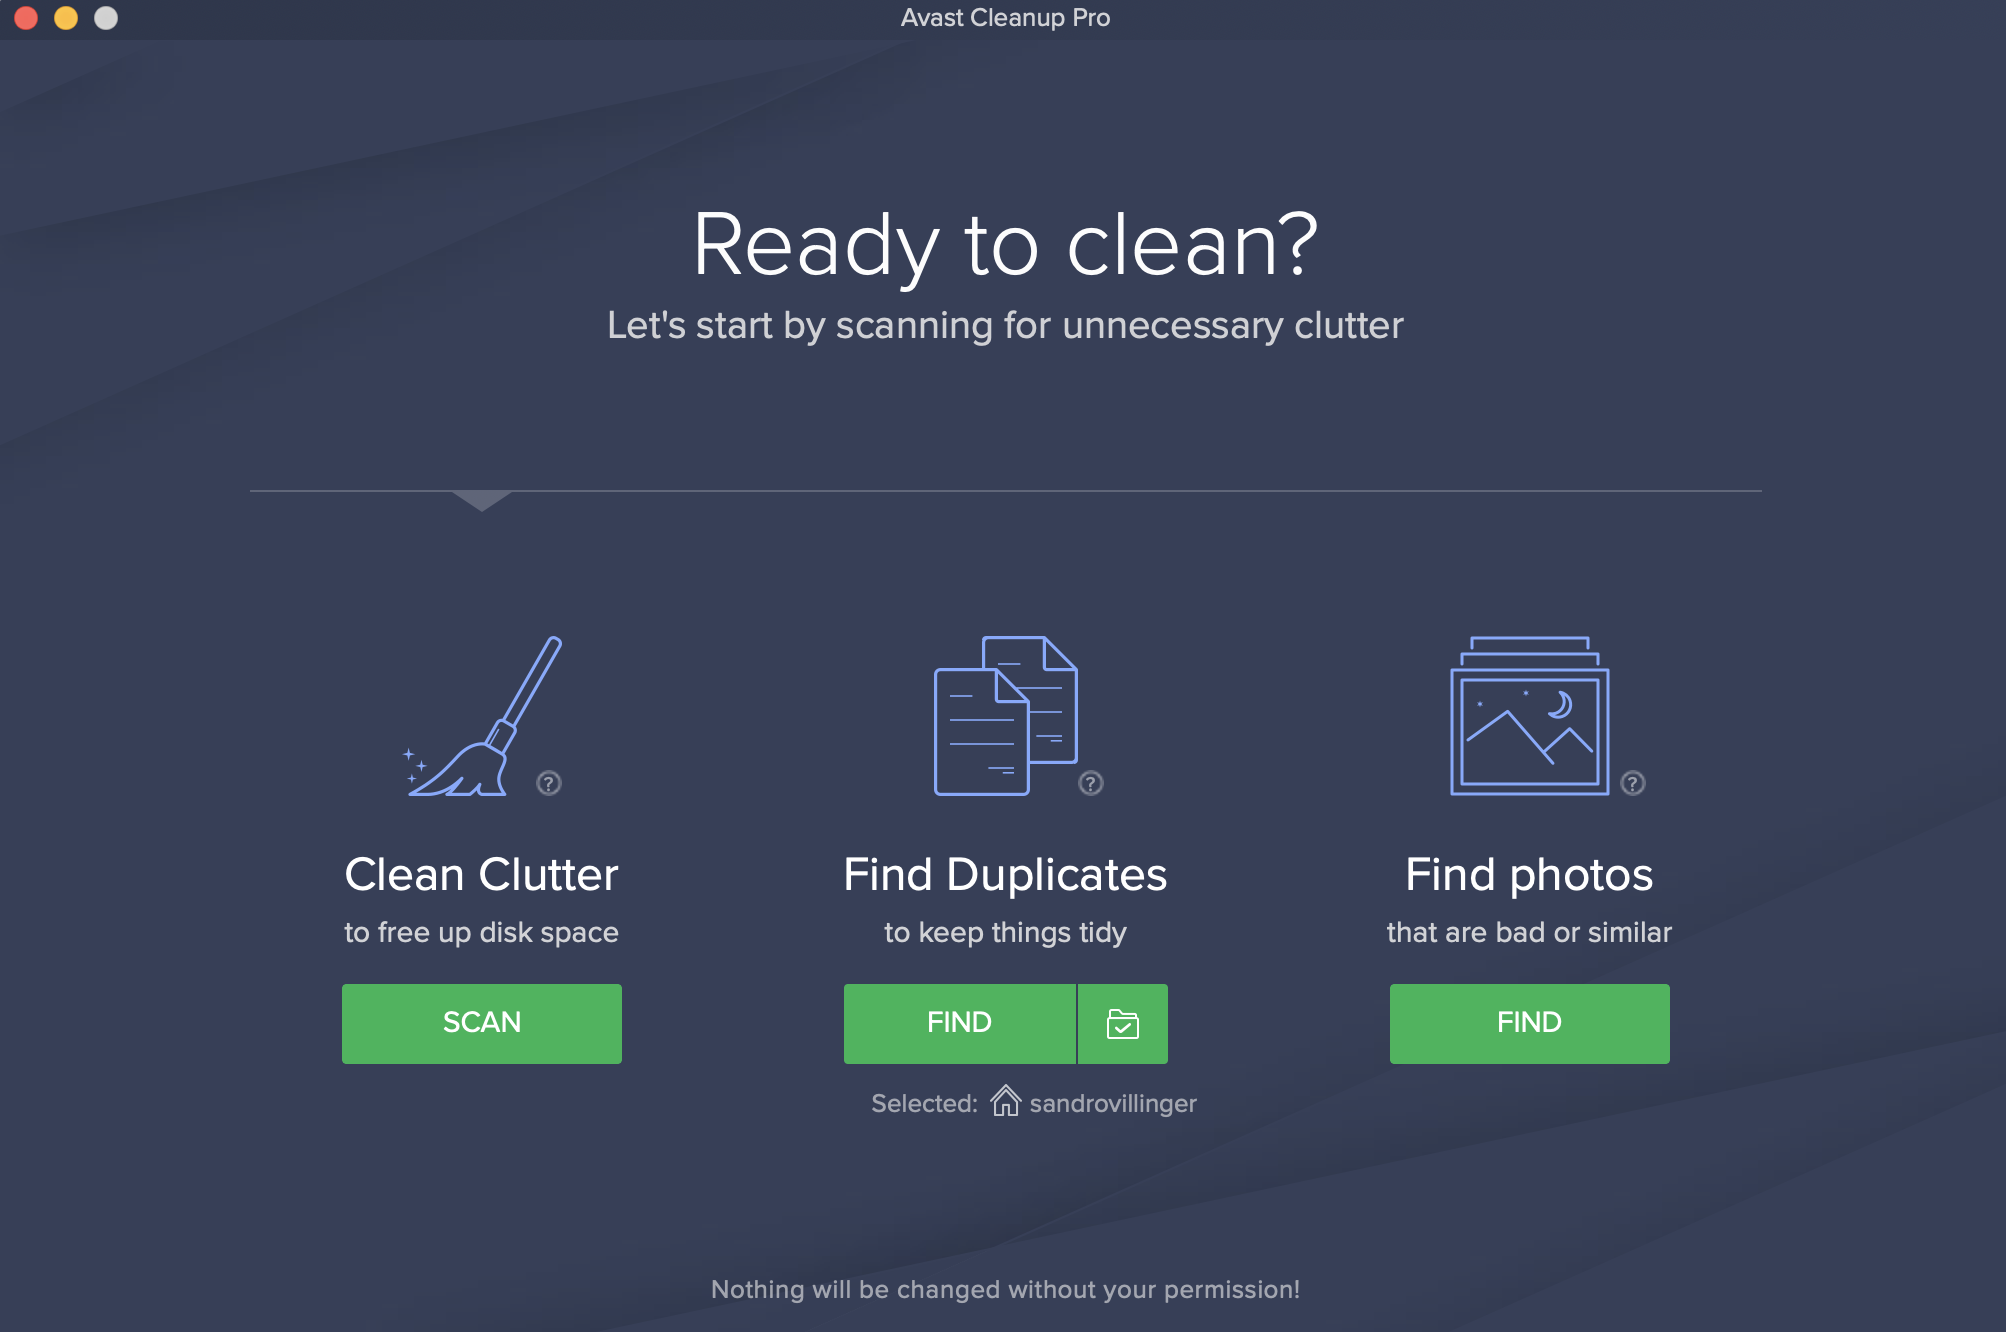 avast cleanup mac download